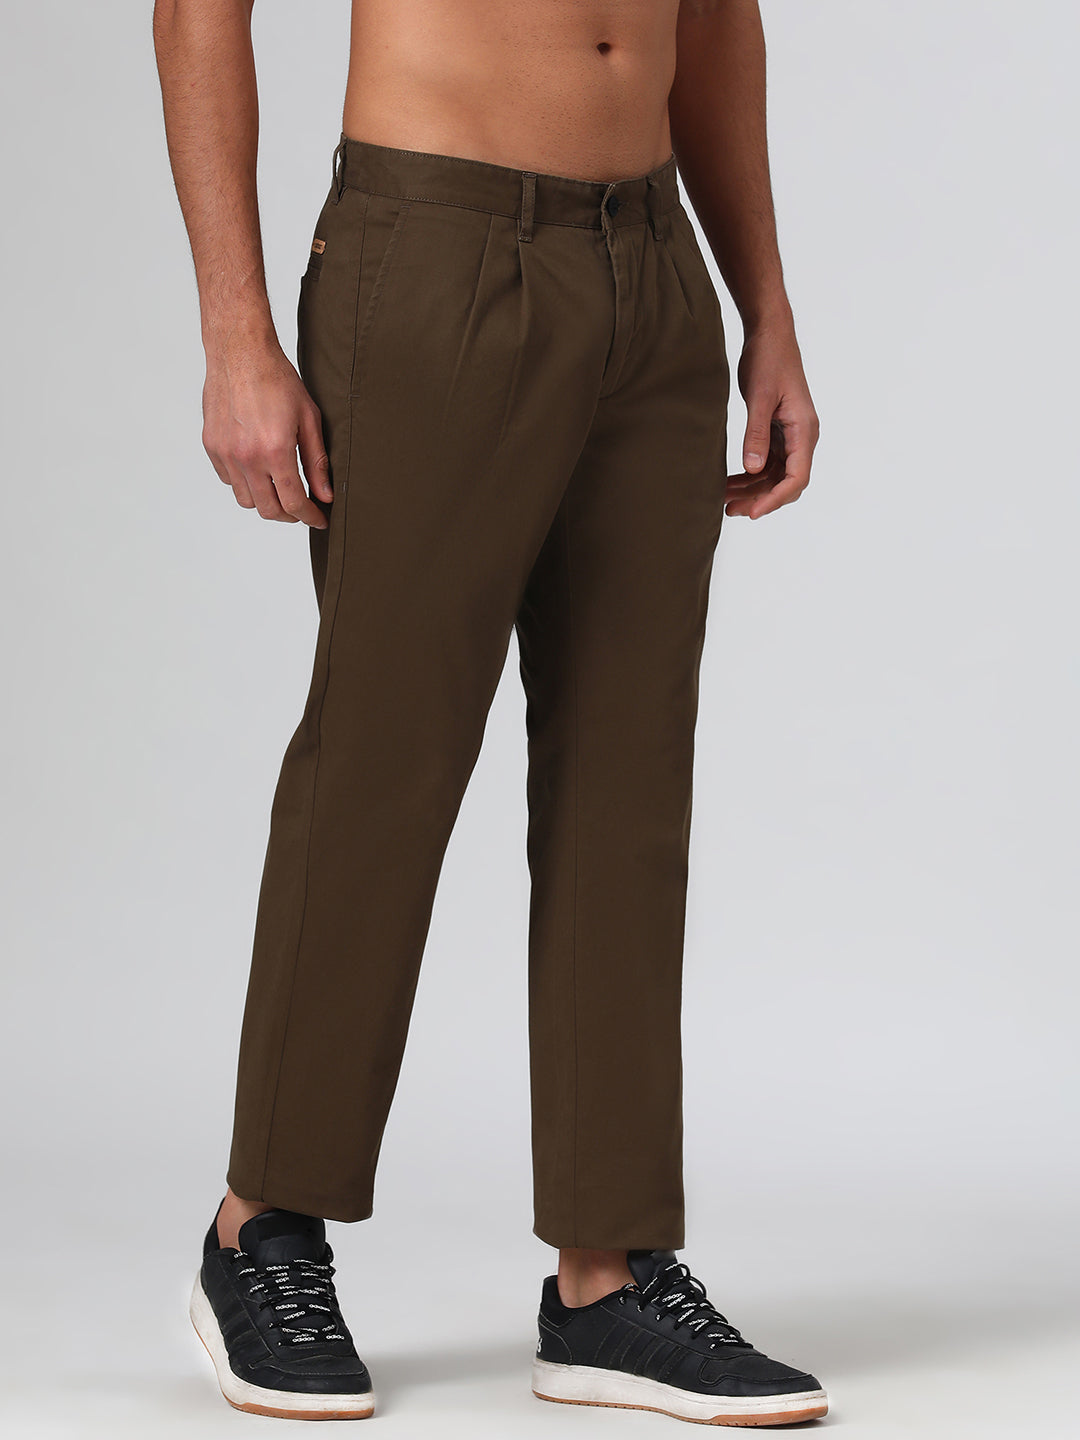 2 Way Stretch Pleated Chinos in Olive- Comfort Fit